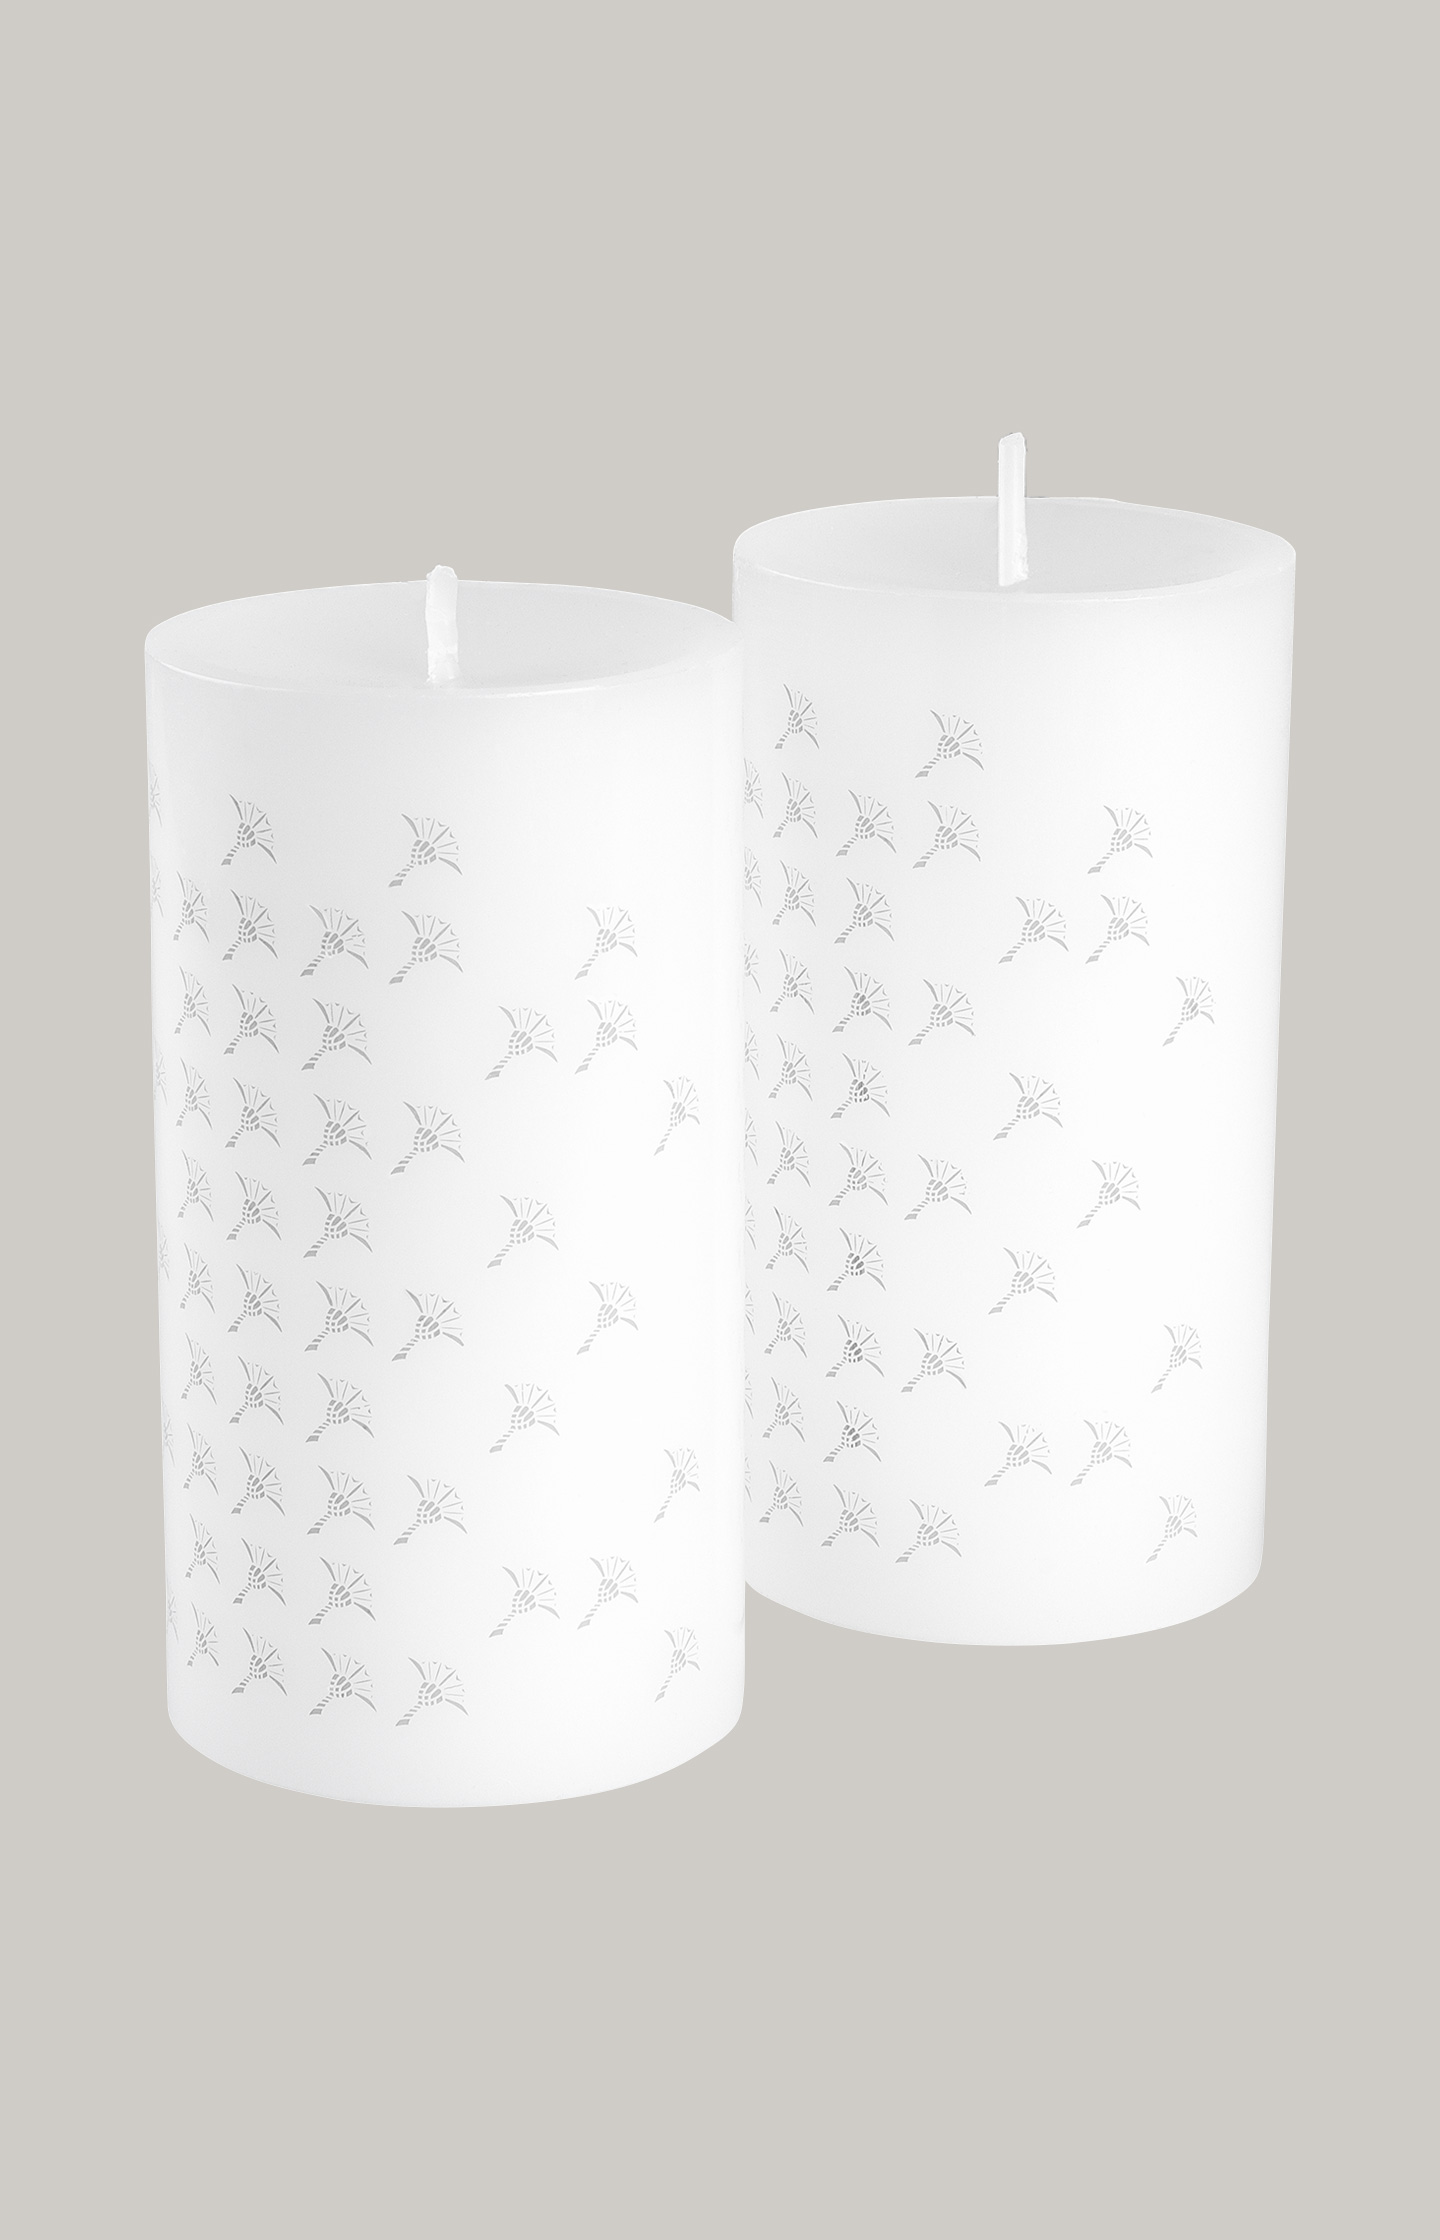 New JOOP! FADED CORNFLOWER - Online pillar white tall in cm candle the JOOP! 15 in - Shop set of 2